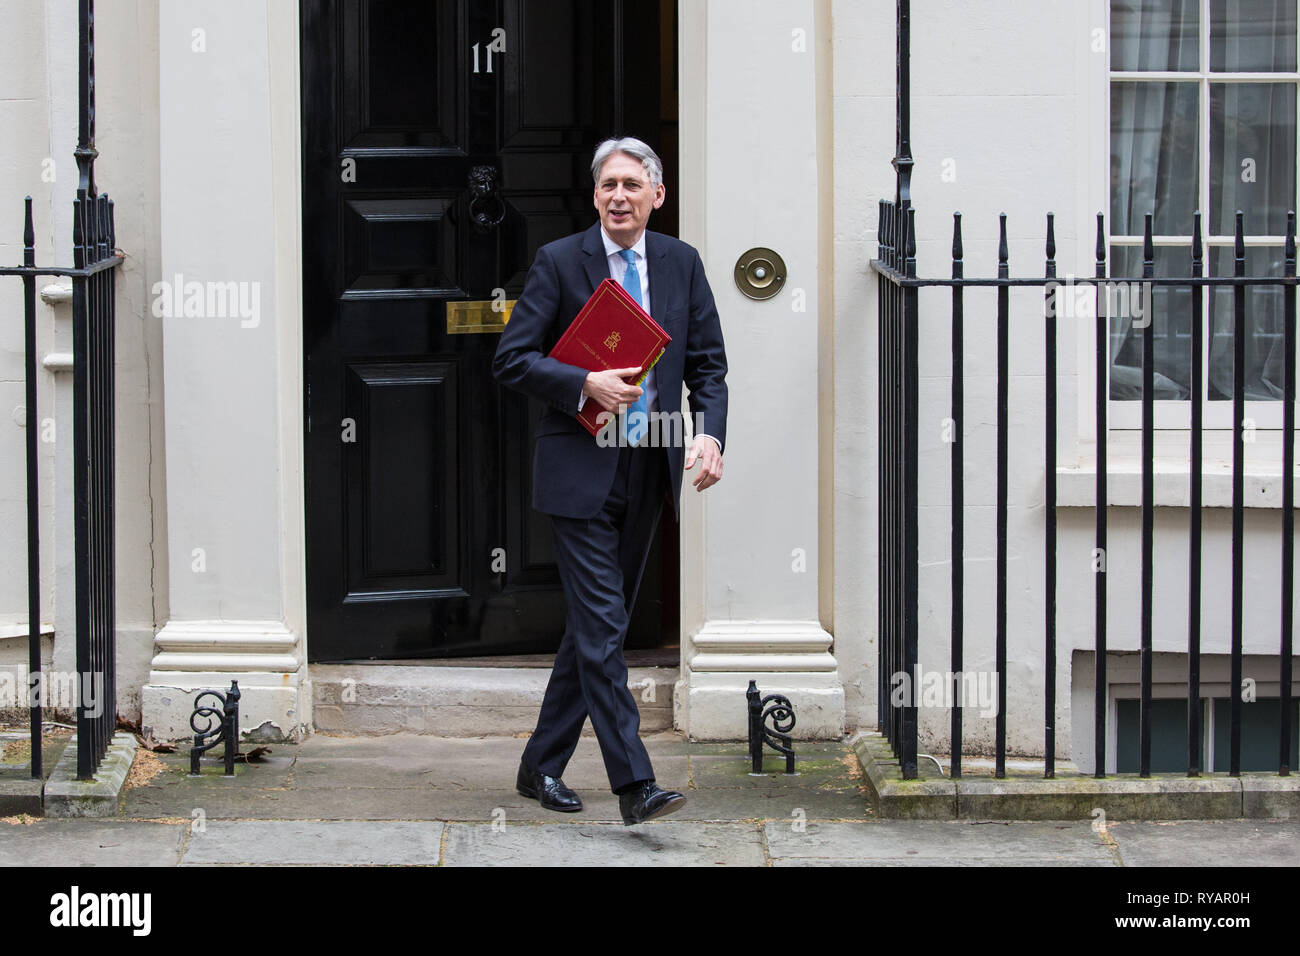 London, UK. 13th Mar, 2019. Chancellor of the Exchequer Philip Hammond leaves 11 Downing Street to present the Spring Statement in the House of Commons. Credit: Mark Kerrison/Alamy Live News Stock Photo